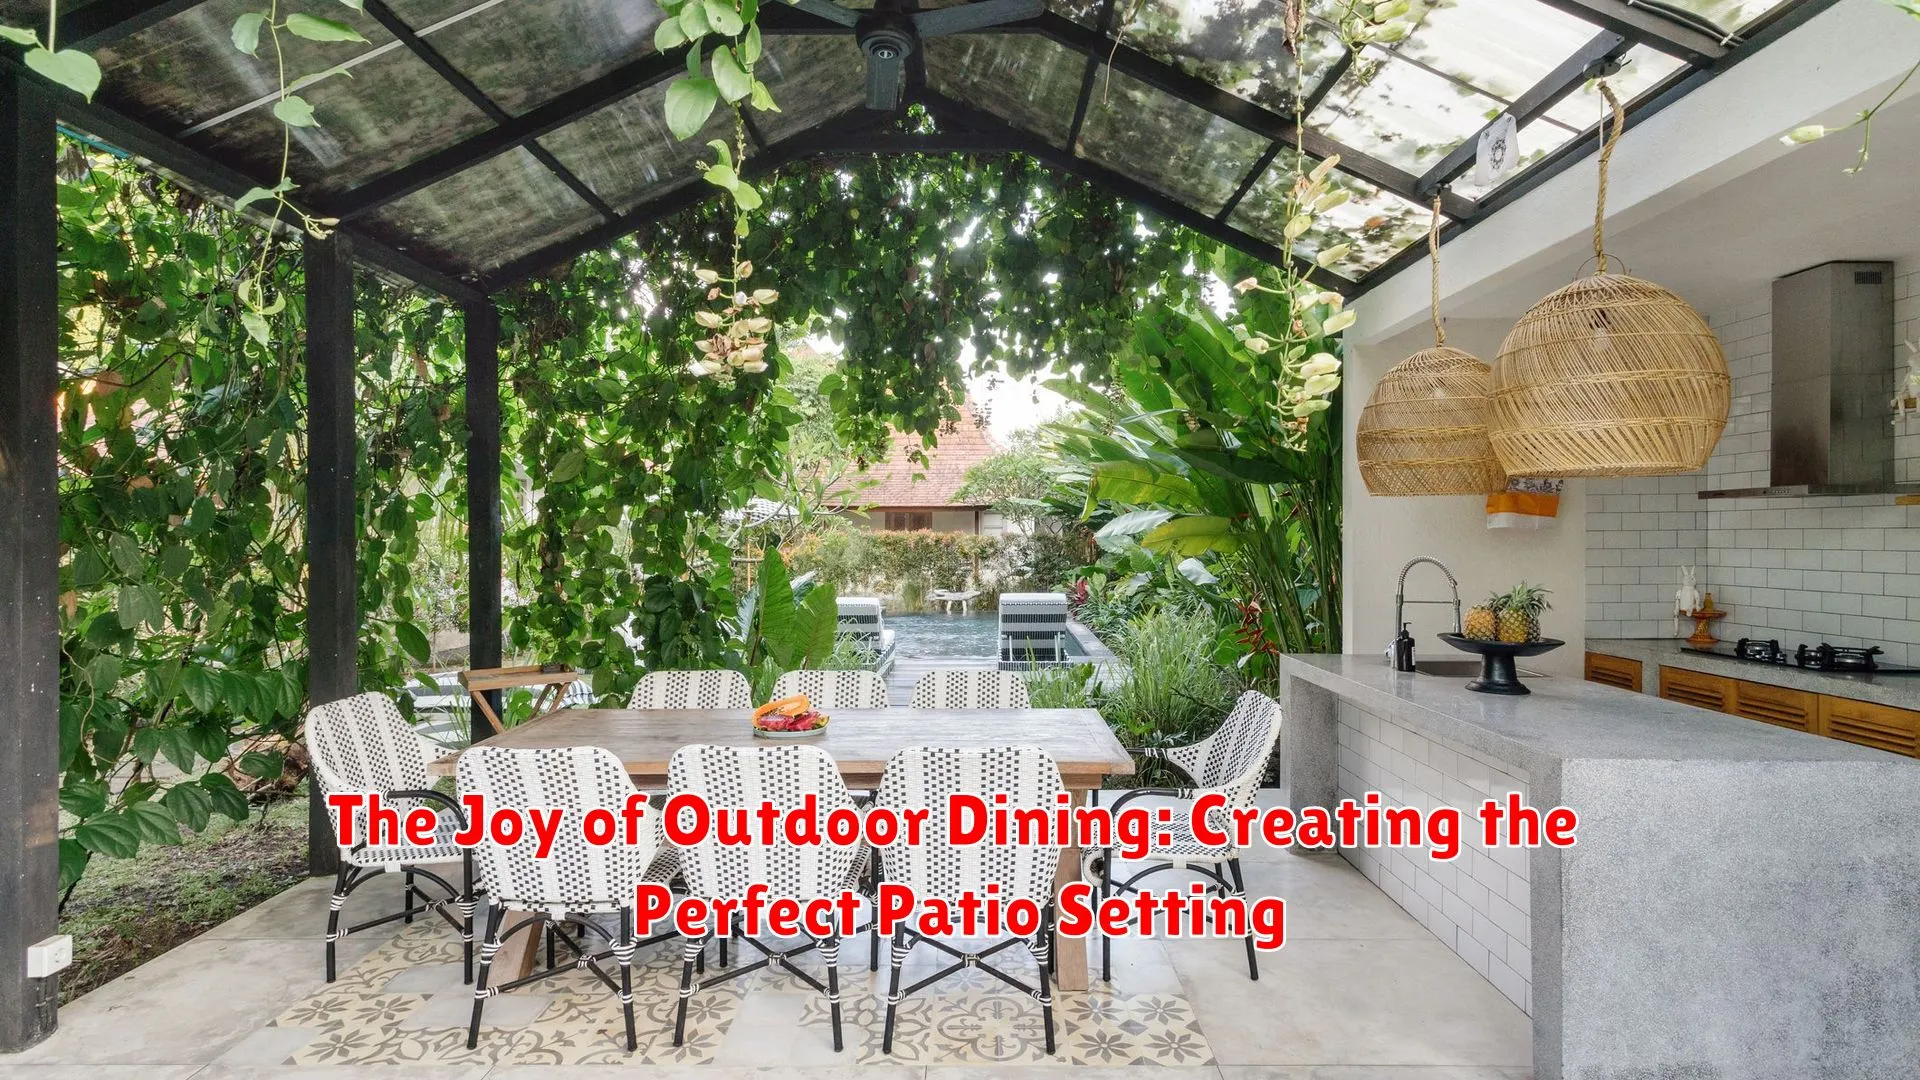 The Joy of Outdoor Dining: Creating the Perfect Patio Setting